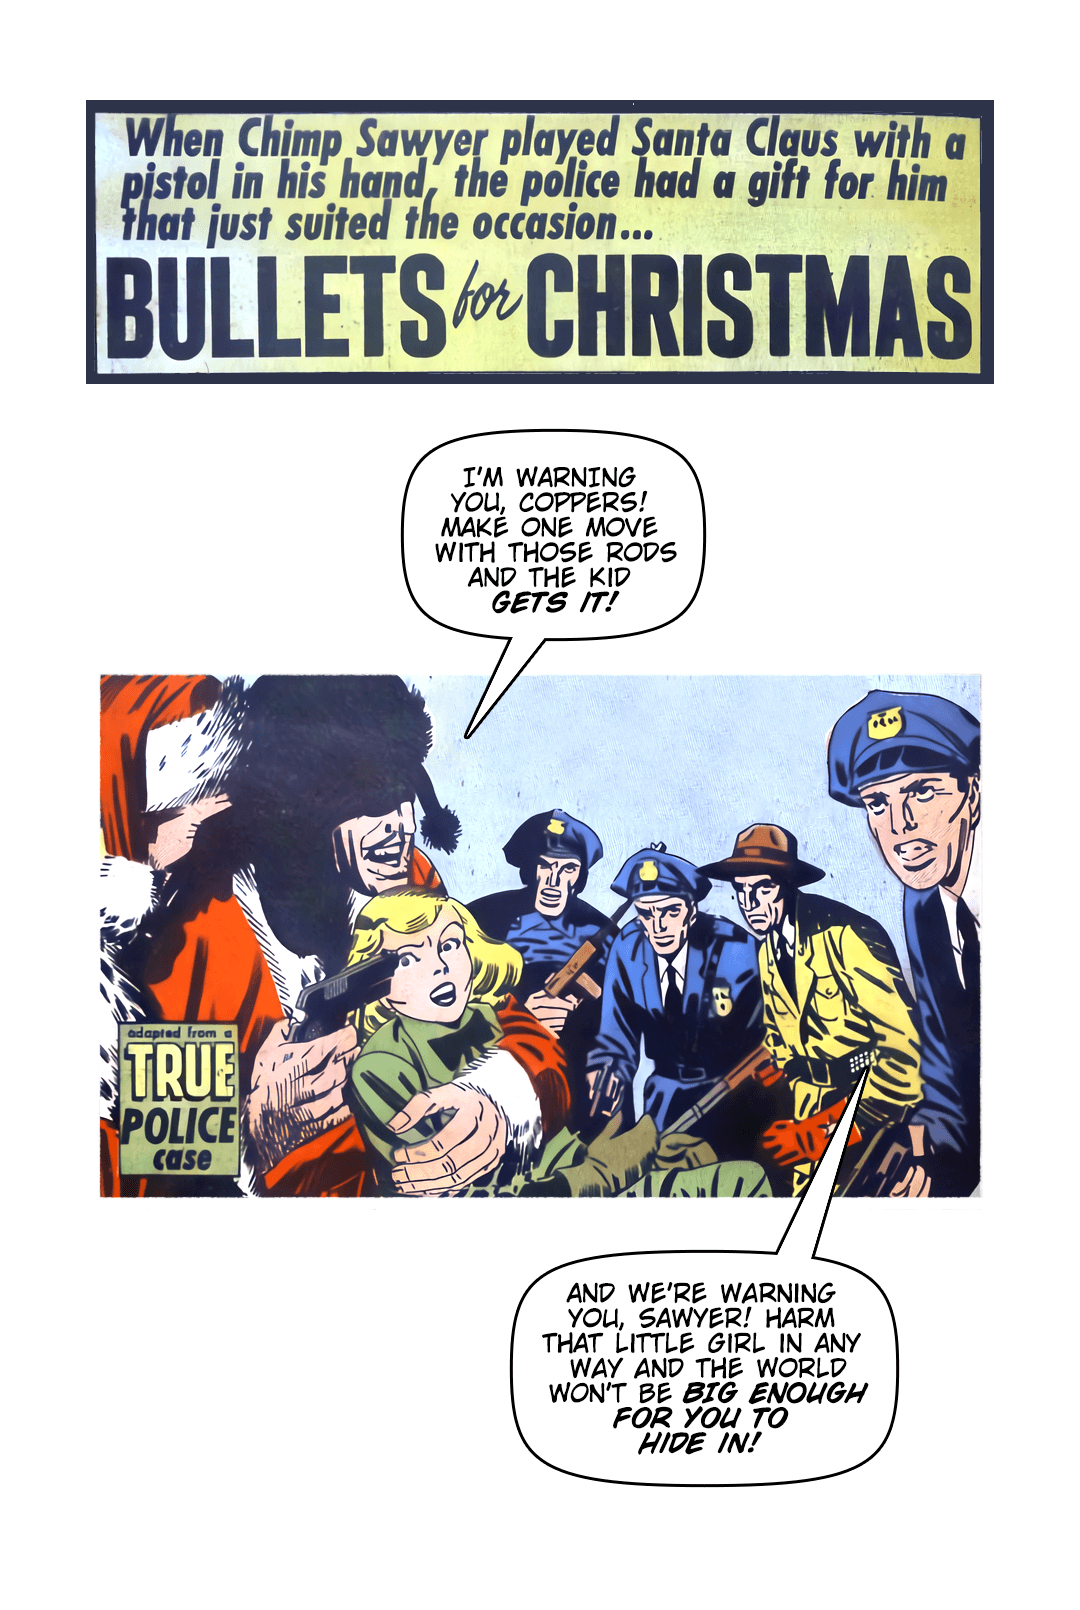 Bullets for Christmas #1 image number 0